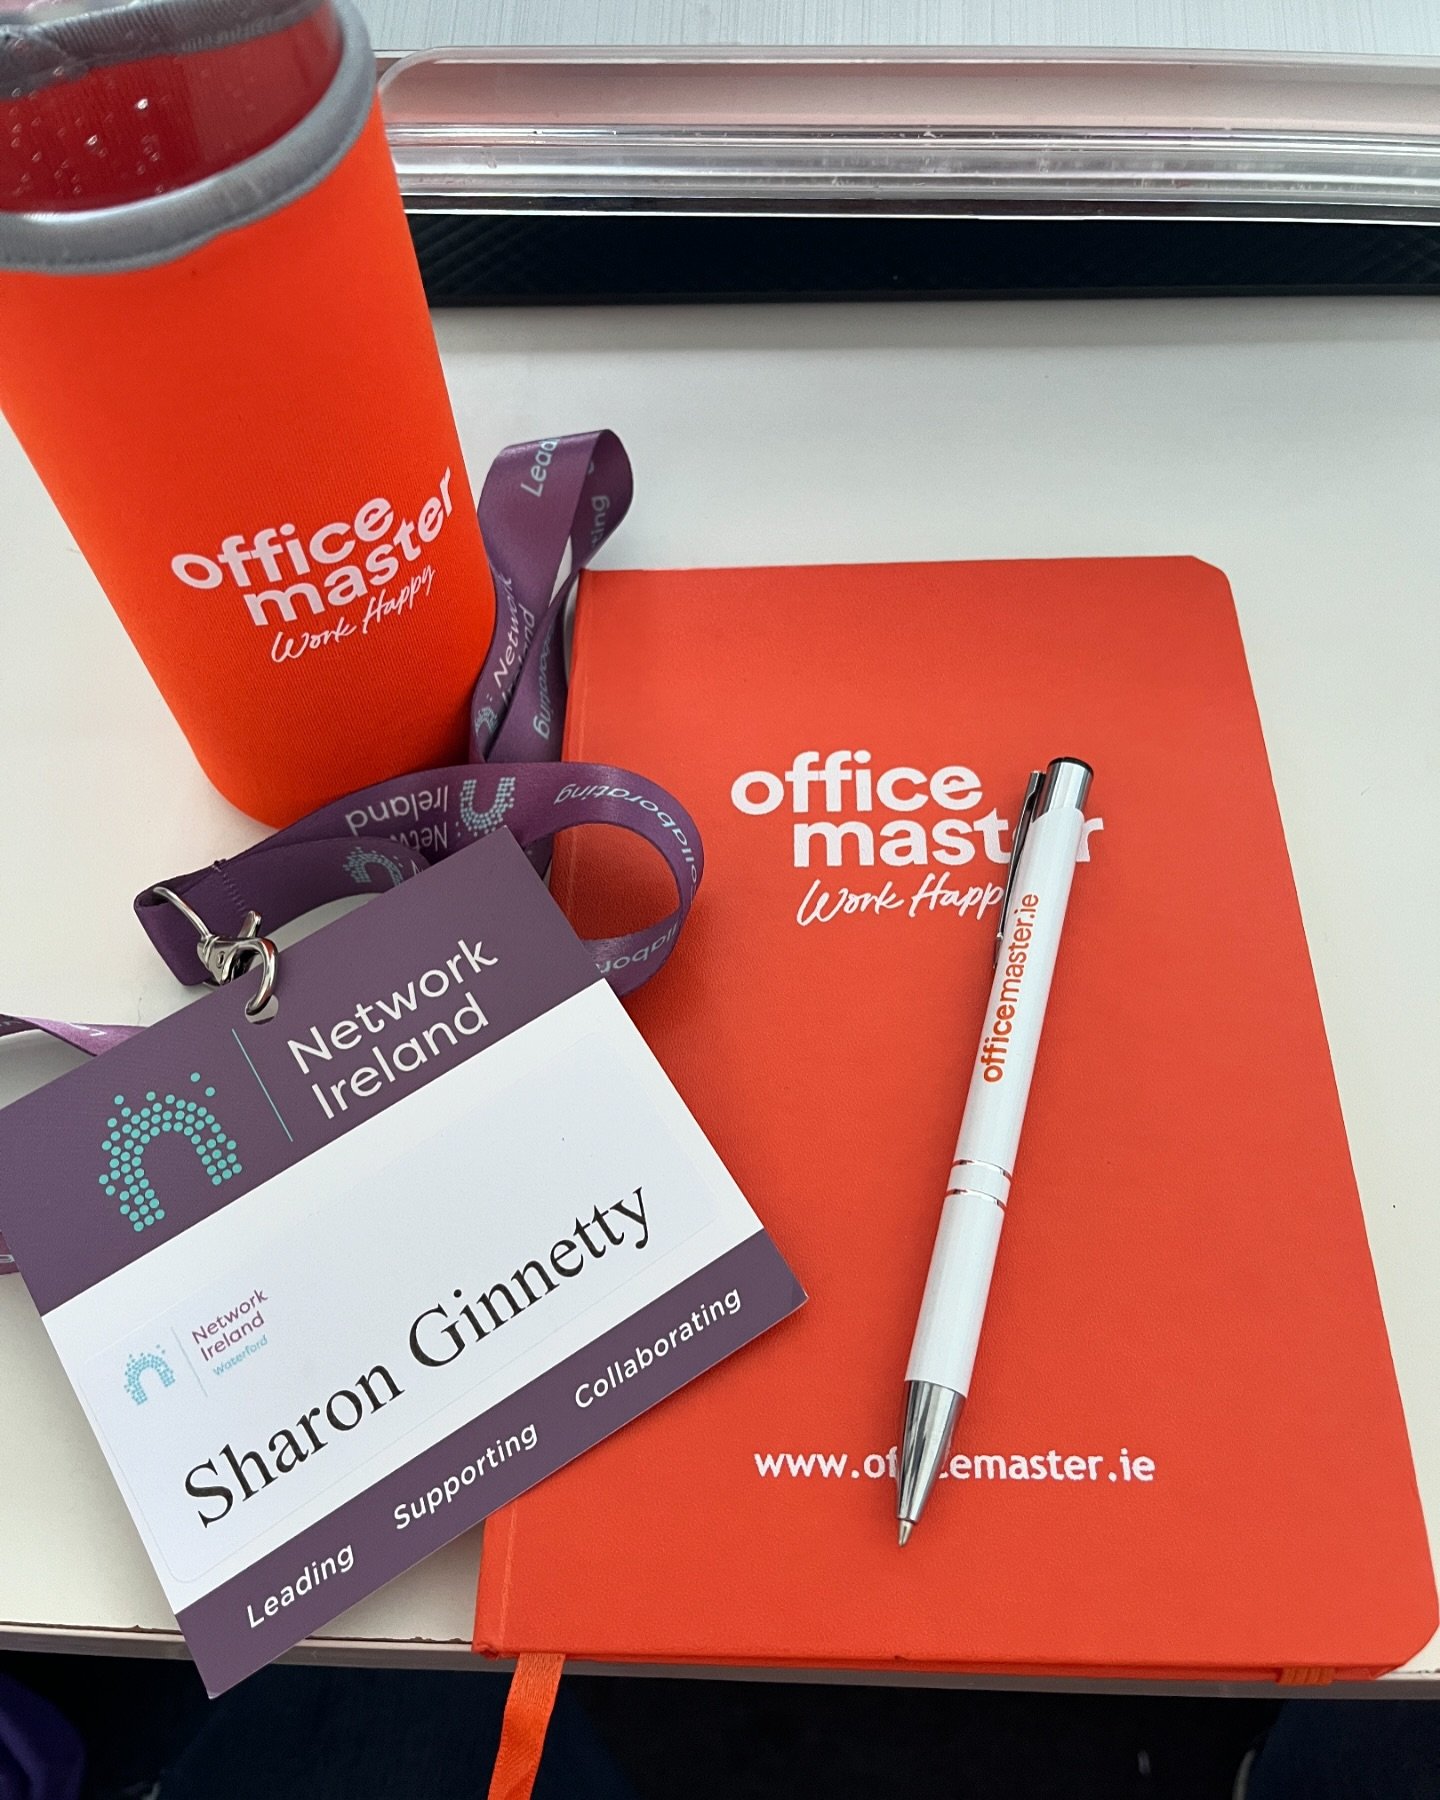 How timely was the @networkwaterford Words That Work event last week in @officemasterie. Just 3 days to go until the @networkireland awards entry deadline. Have my notes (thank you @derbhile_graham_ ), hydration and even a stress ball (thank you @off